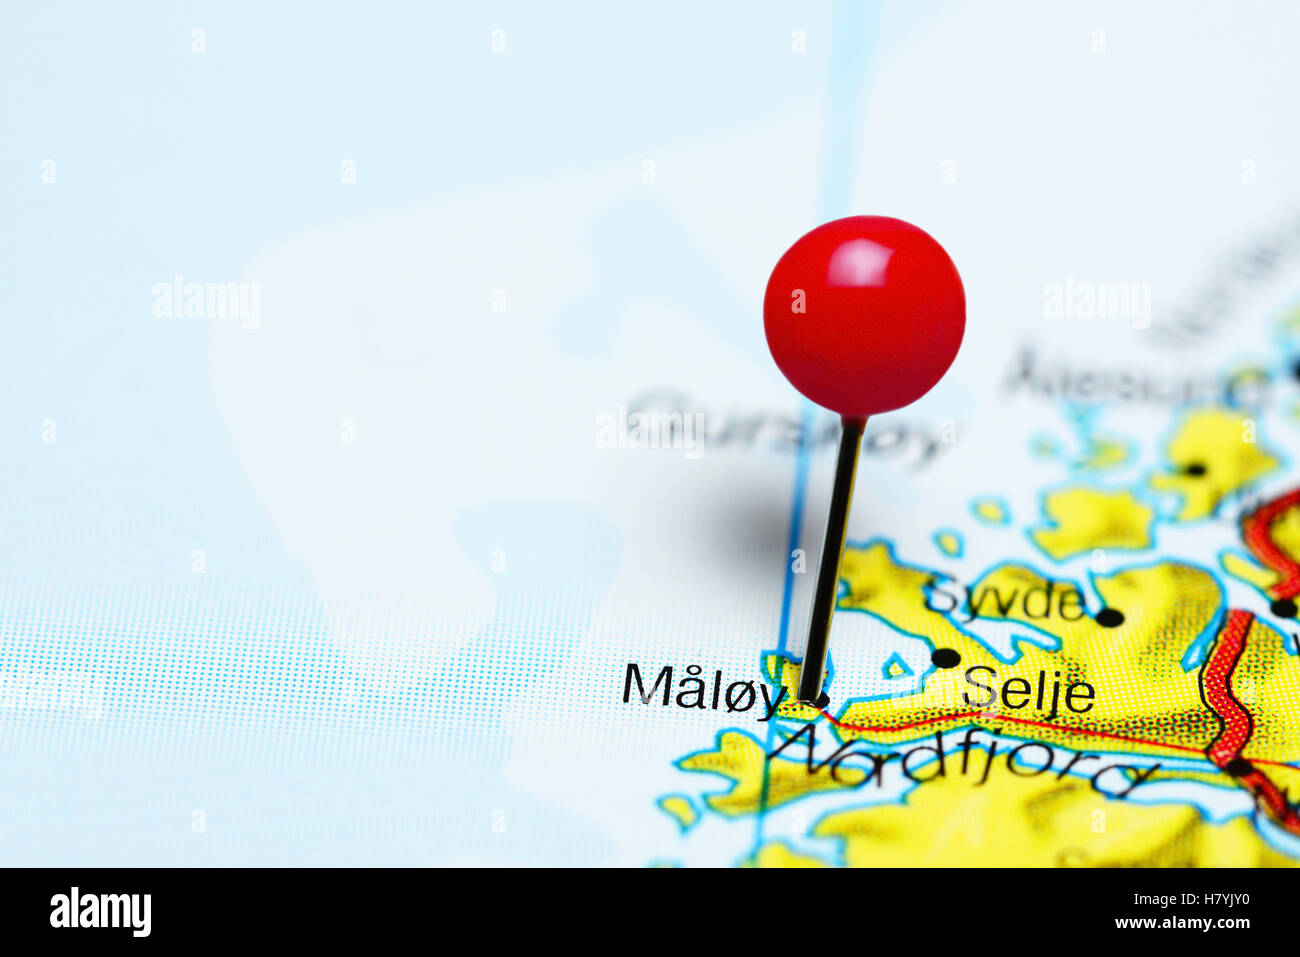 Maloy pinned on a map of Norway Stock Photo